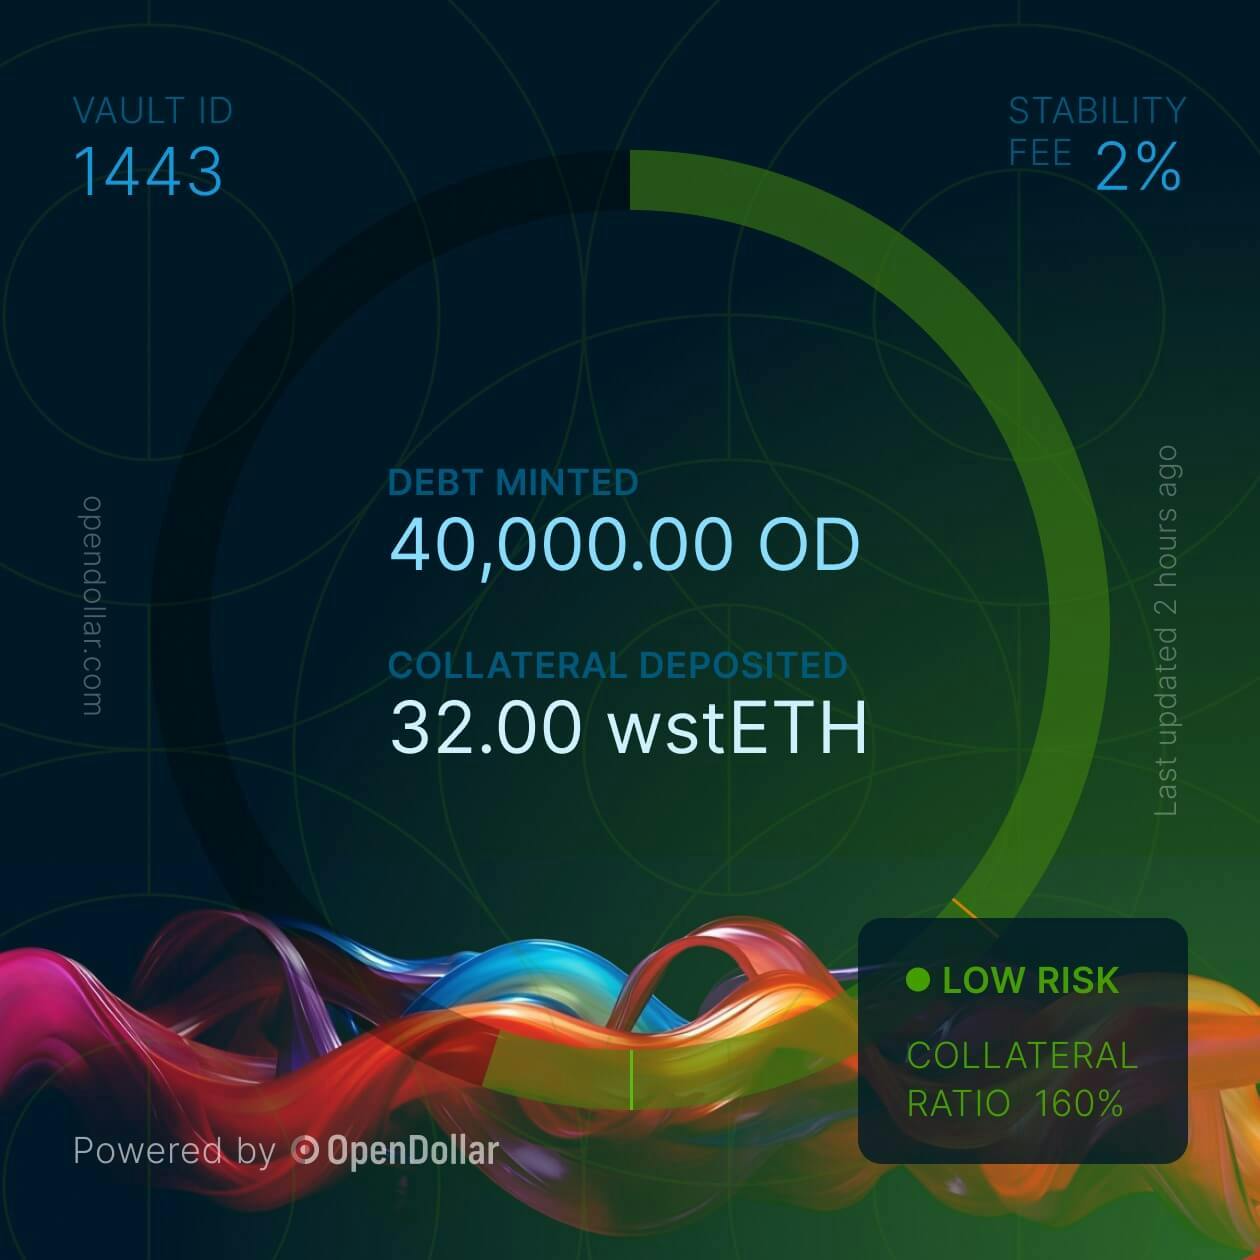 Your deposits are more accessible, manageable, composable, and visible with Non-Fungible Vaults, the value of which can easily be seen in your cryptowallet at any time. (Image: Open Dollar)